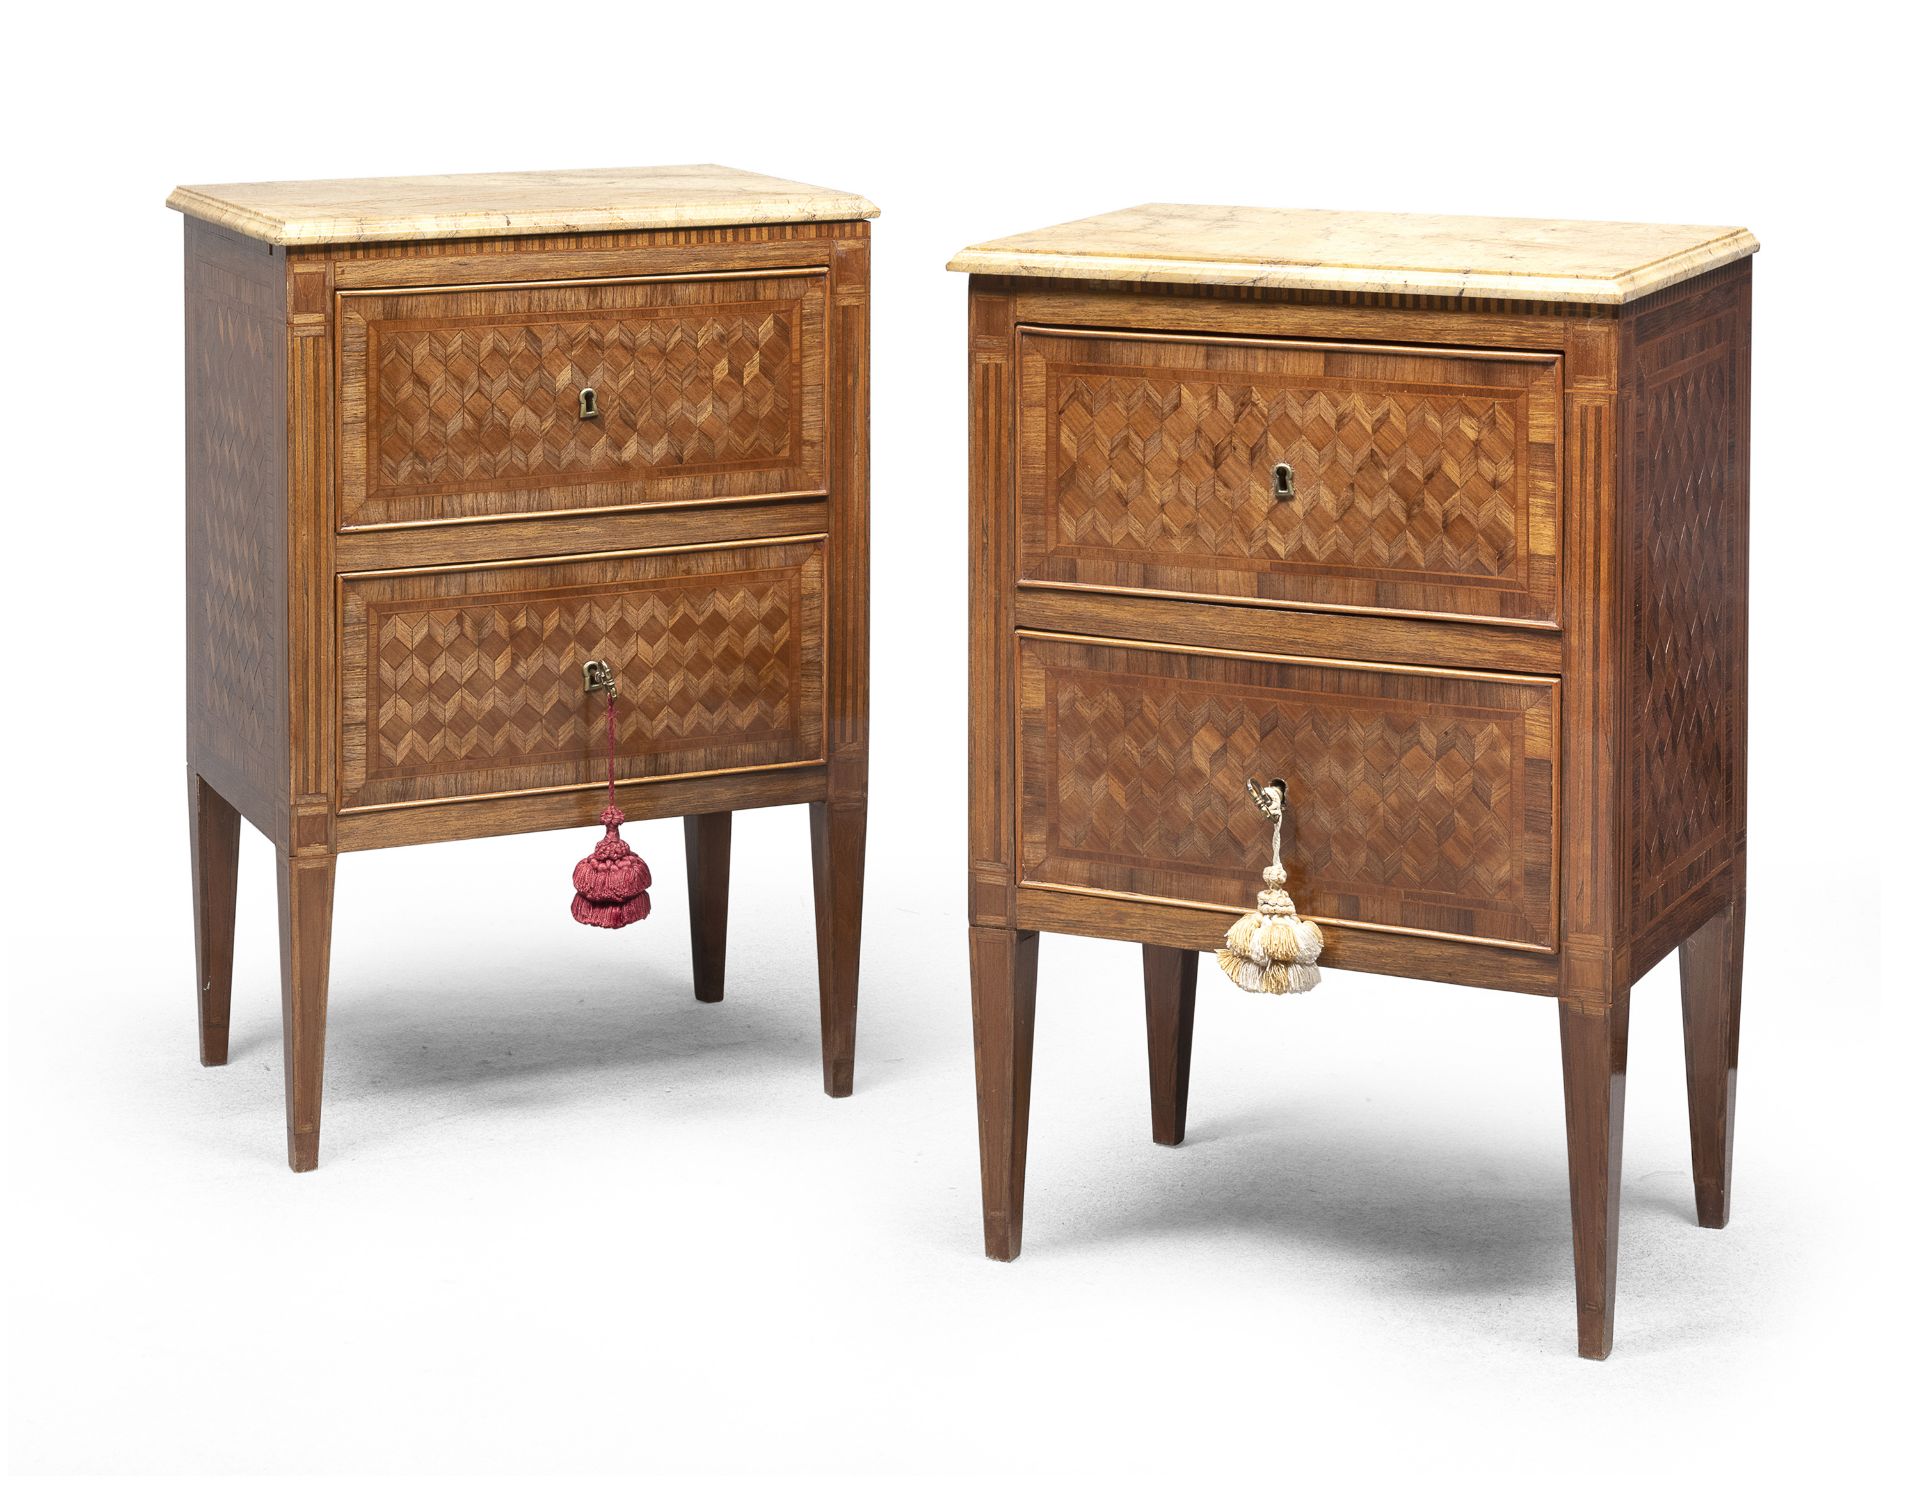 PAIR OF BEDSIDE TABLES IN BOIS DE ROSE CENTRAL ITALY LATE 18th CENTURY